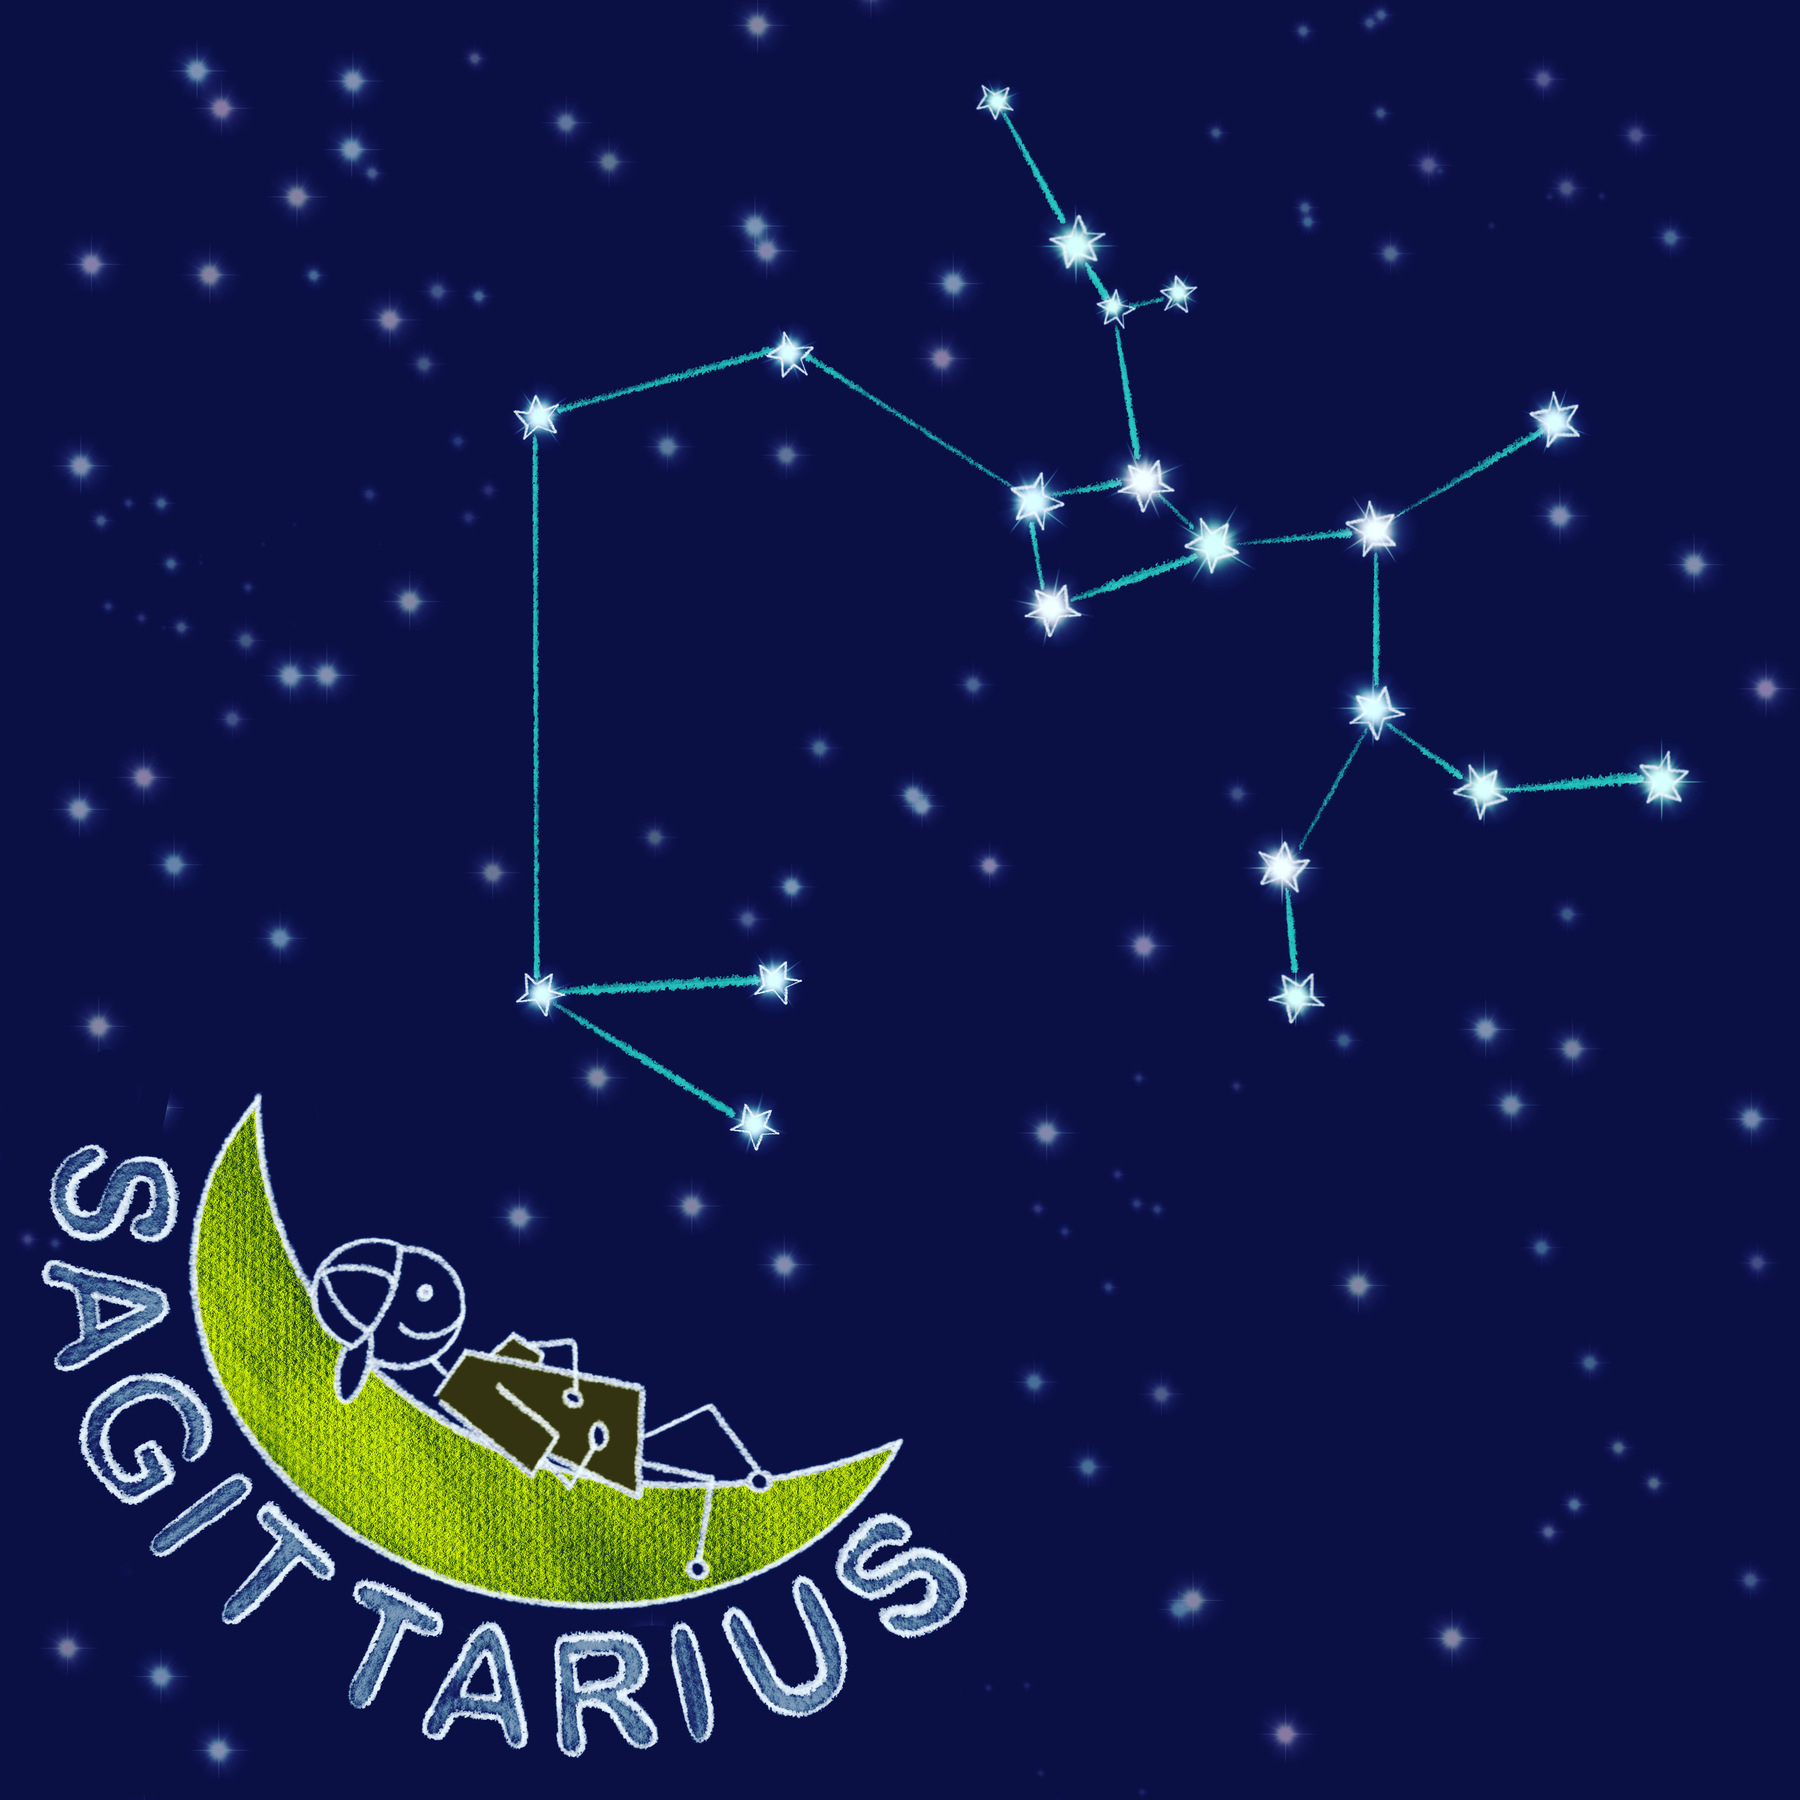 A stick figure is lying on a crescent moon and looking up at the Sagittarius consellation